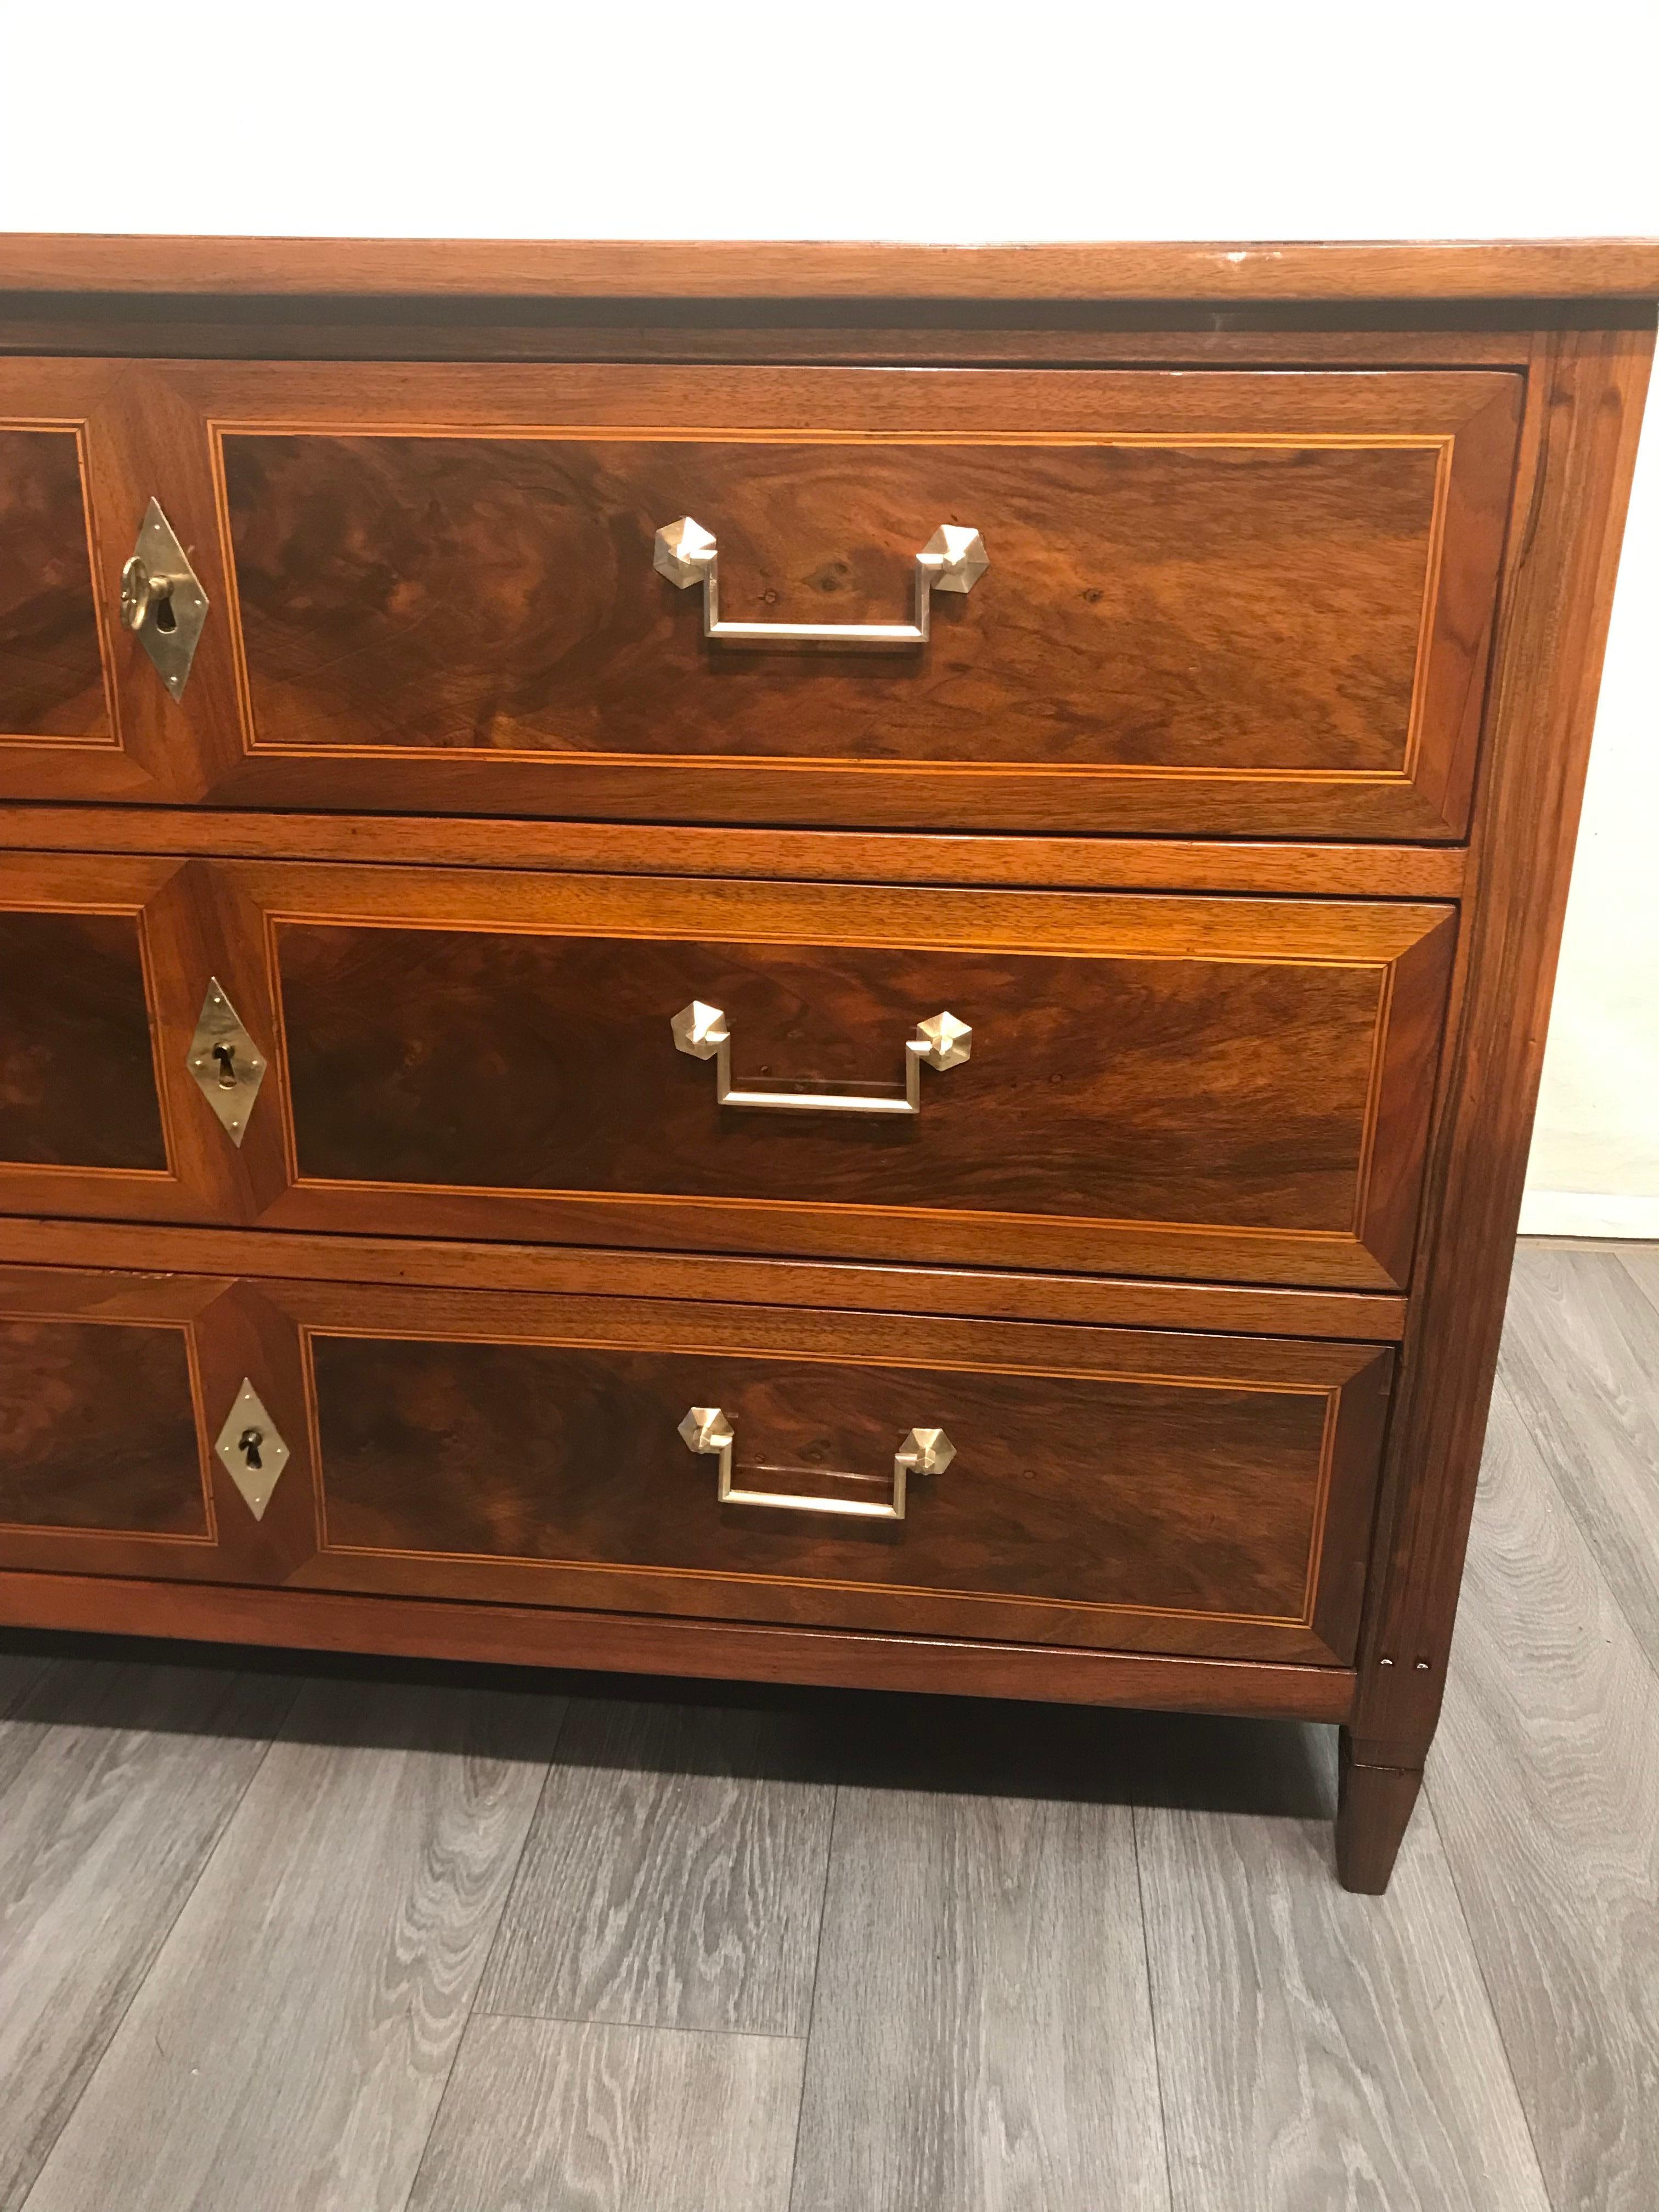 Louis XVI Chest of Drawers, South German 1780, Walnut In Good Condition For Sale In Belmont, MA